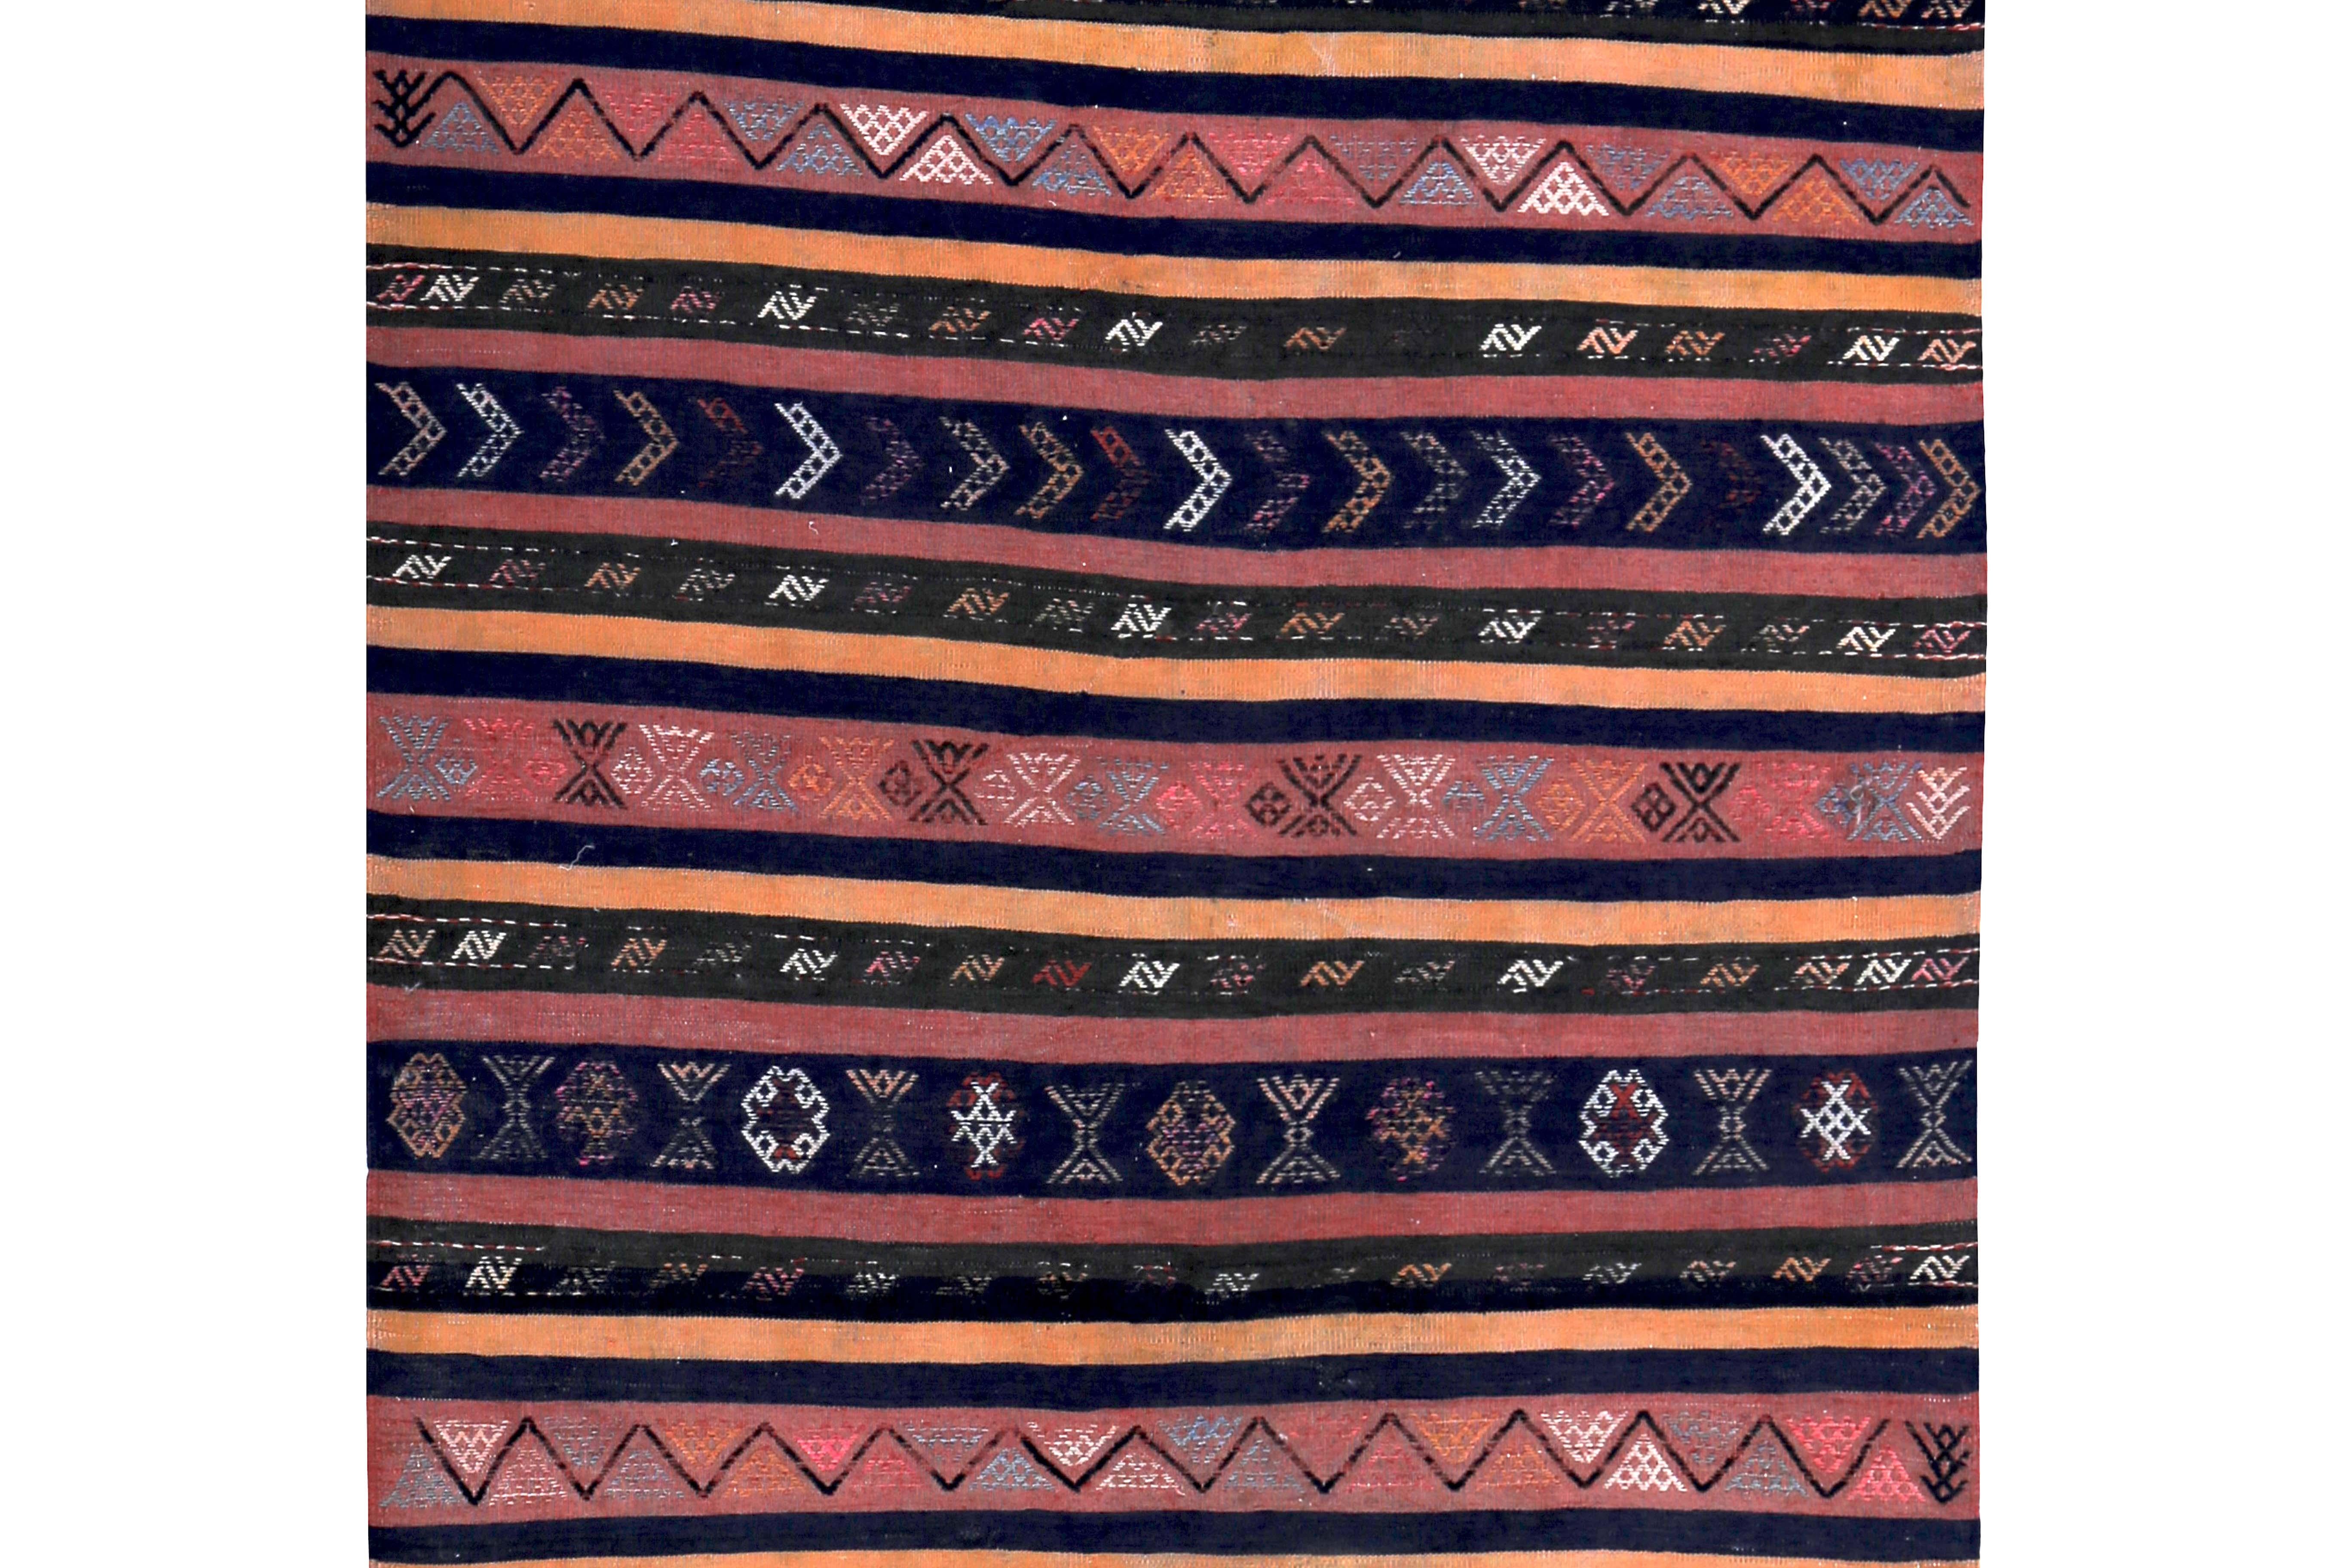 Hand-Woven Turkish Kilim Runner Rug with Orange, Blue, Red and Black Tribal Diamonds For Sale